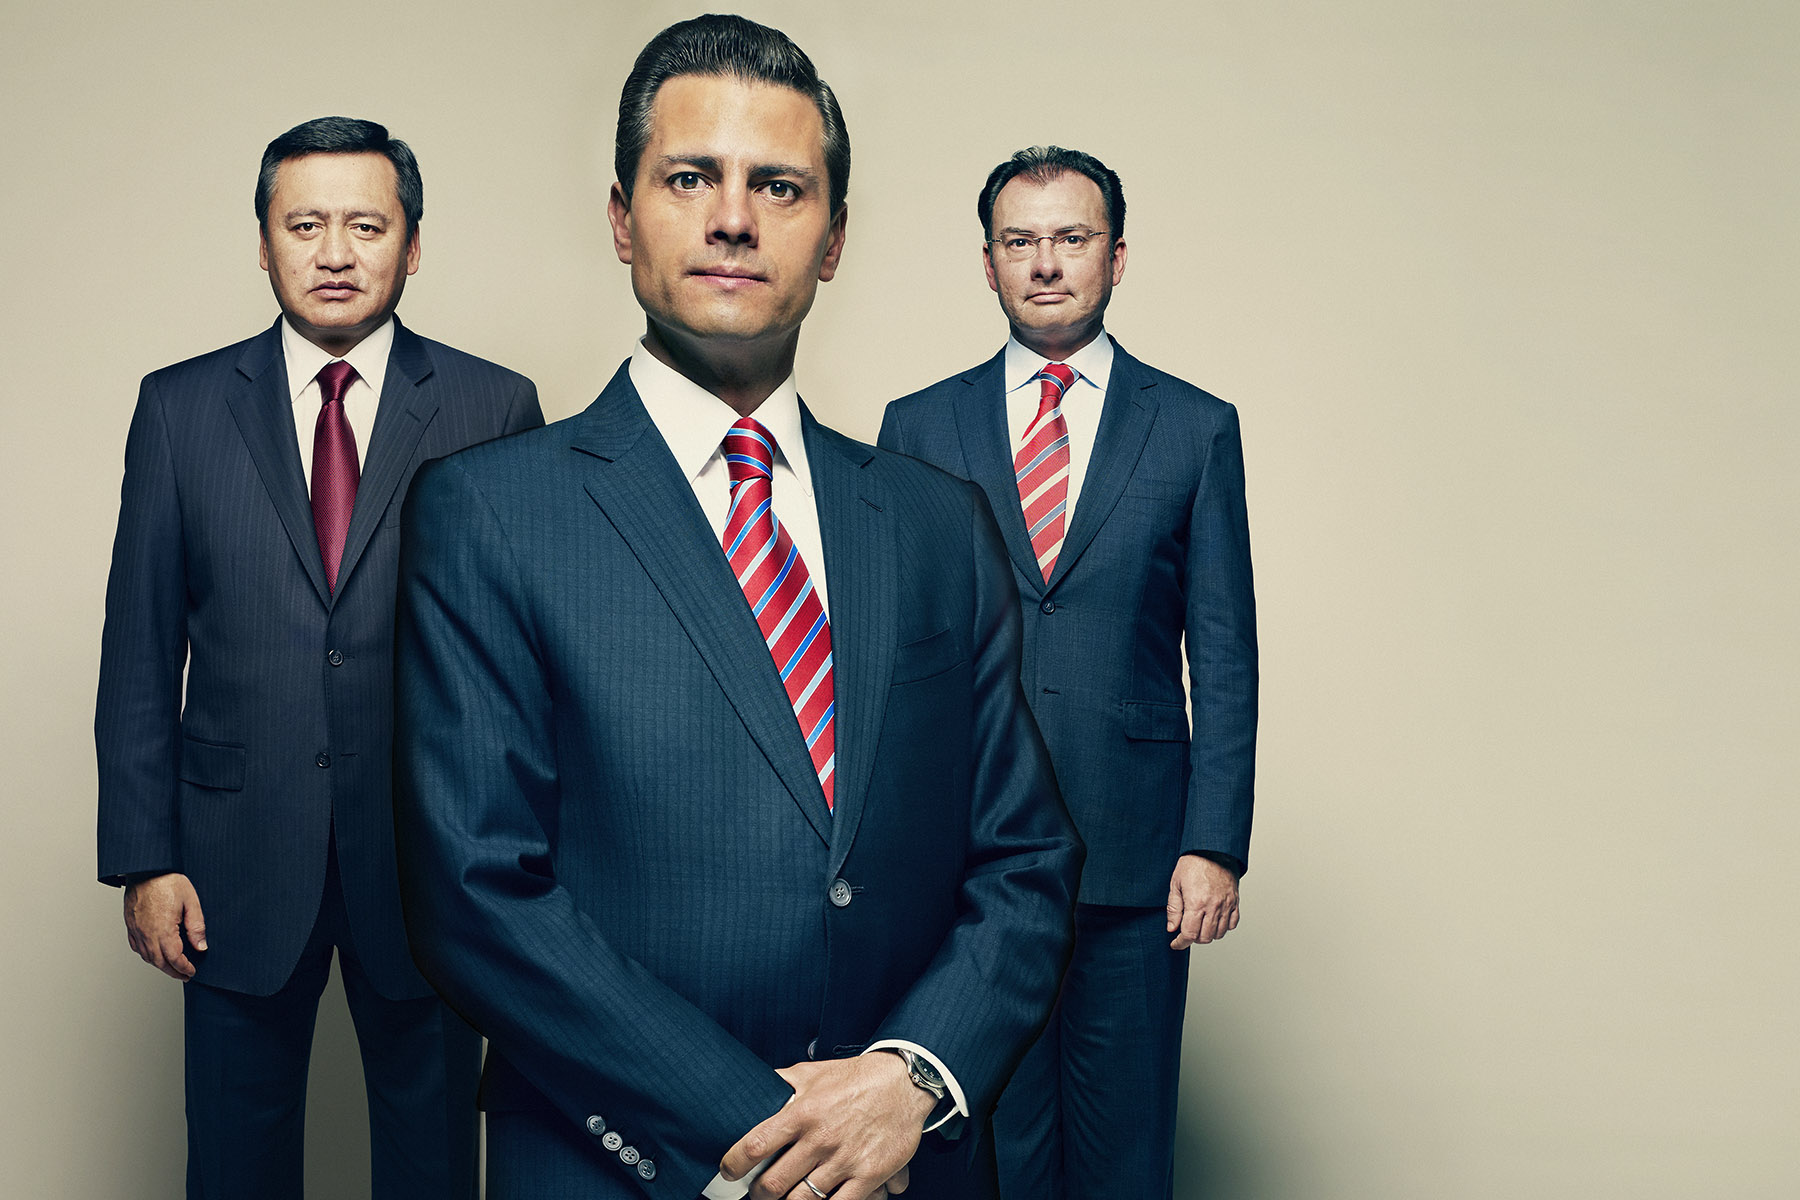 Left to right: Miguel Ángel Osorio Chong, Interior Minister; Enrique Peña Nieto, President; Luis Videgaray Caso, Finance Minister. (Photographs by Peter Hapak for TIME)